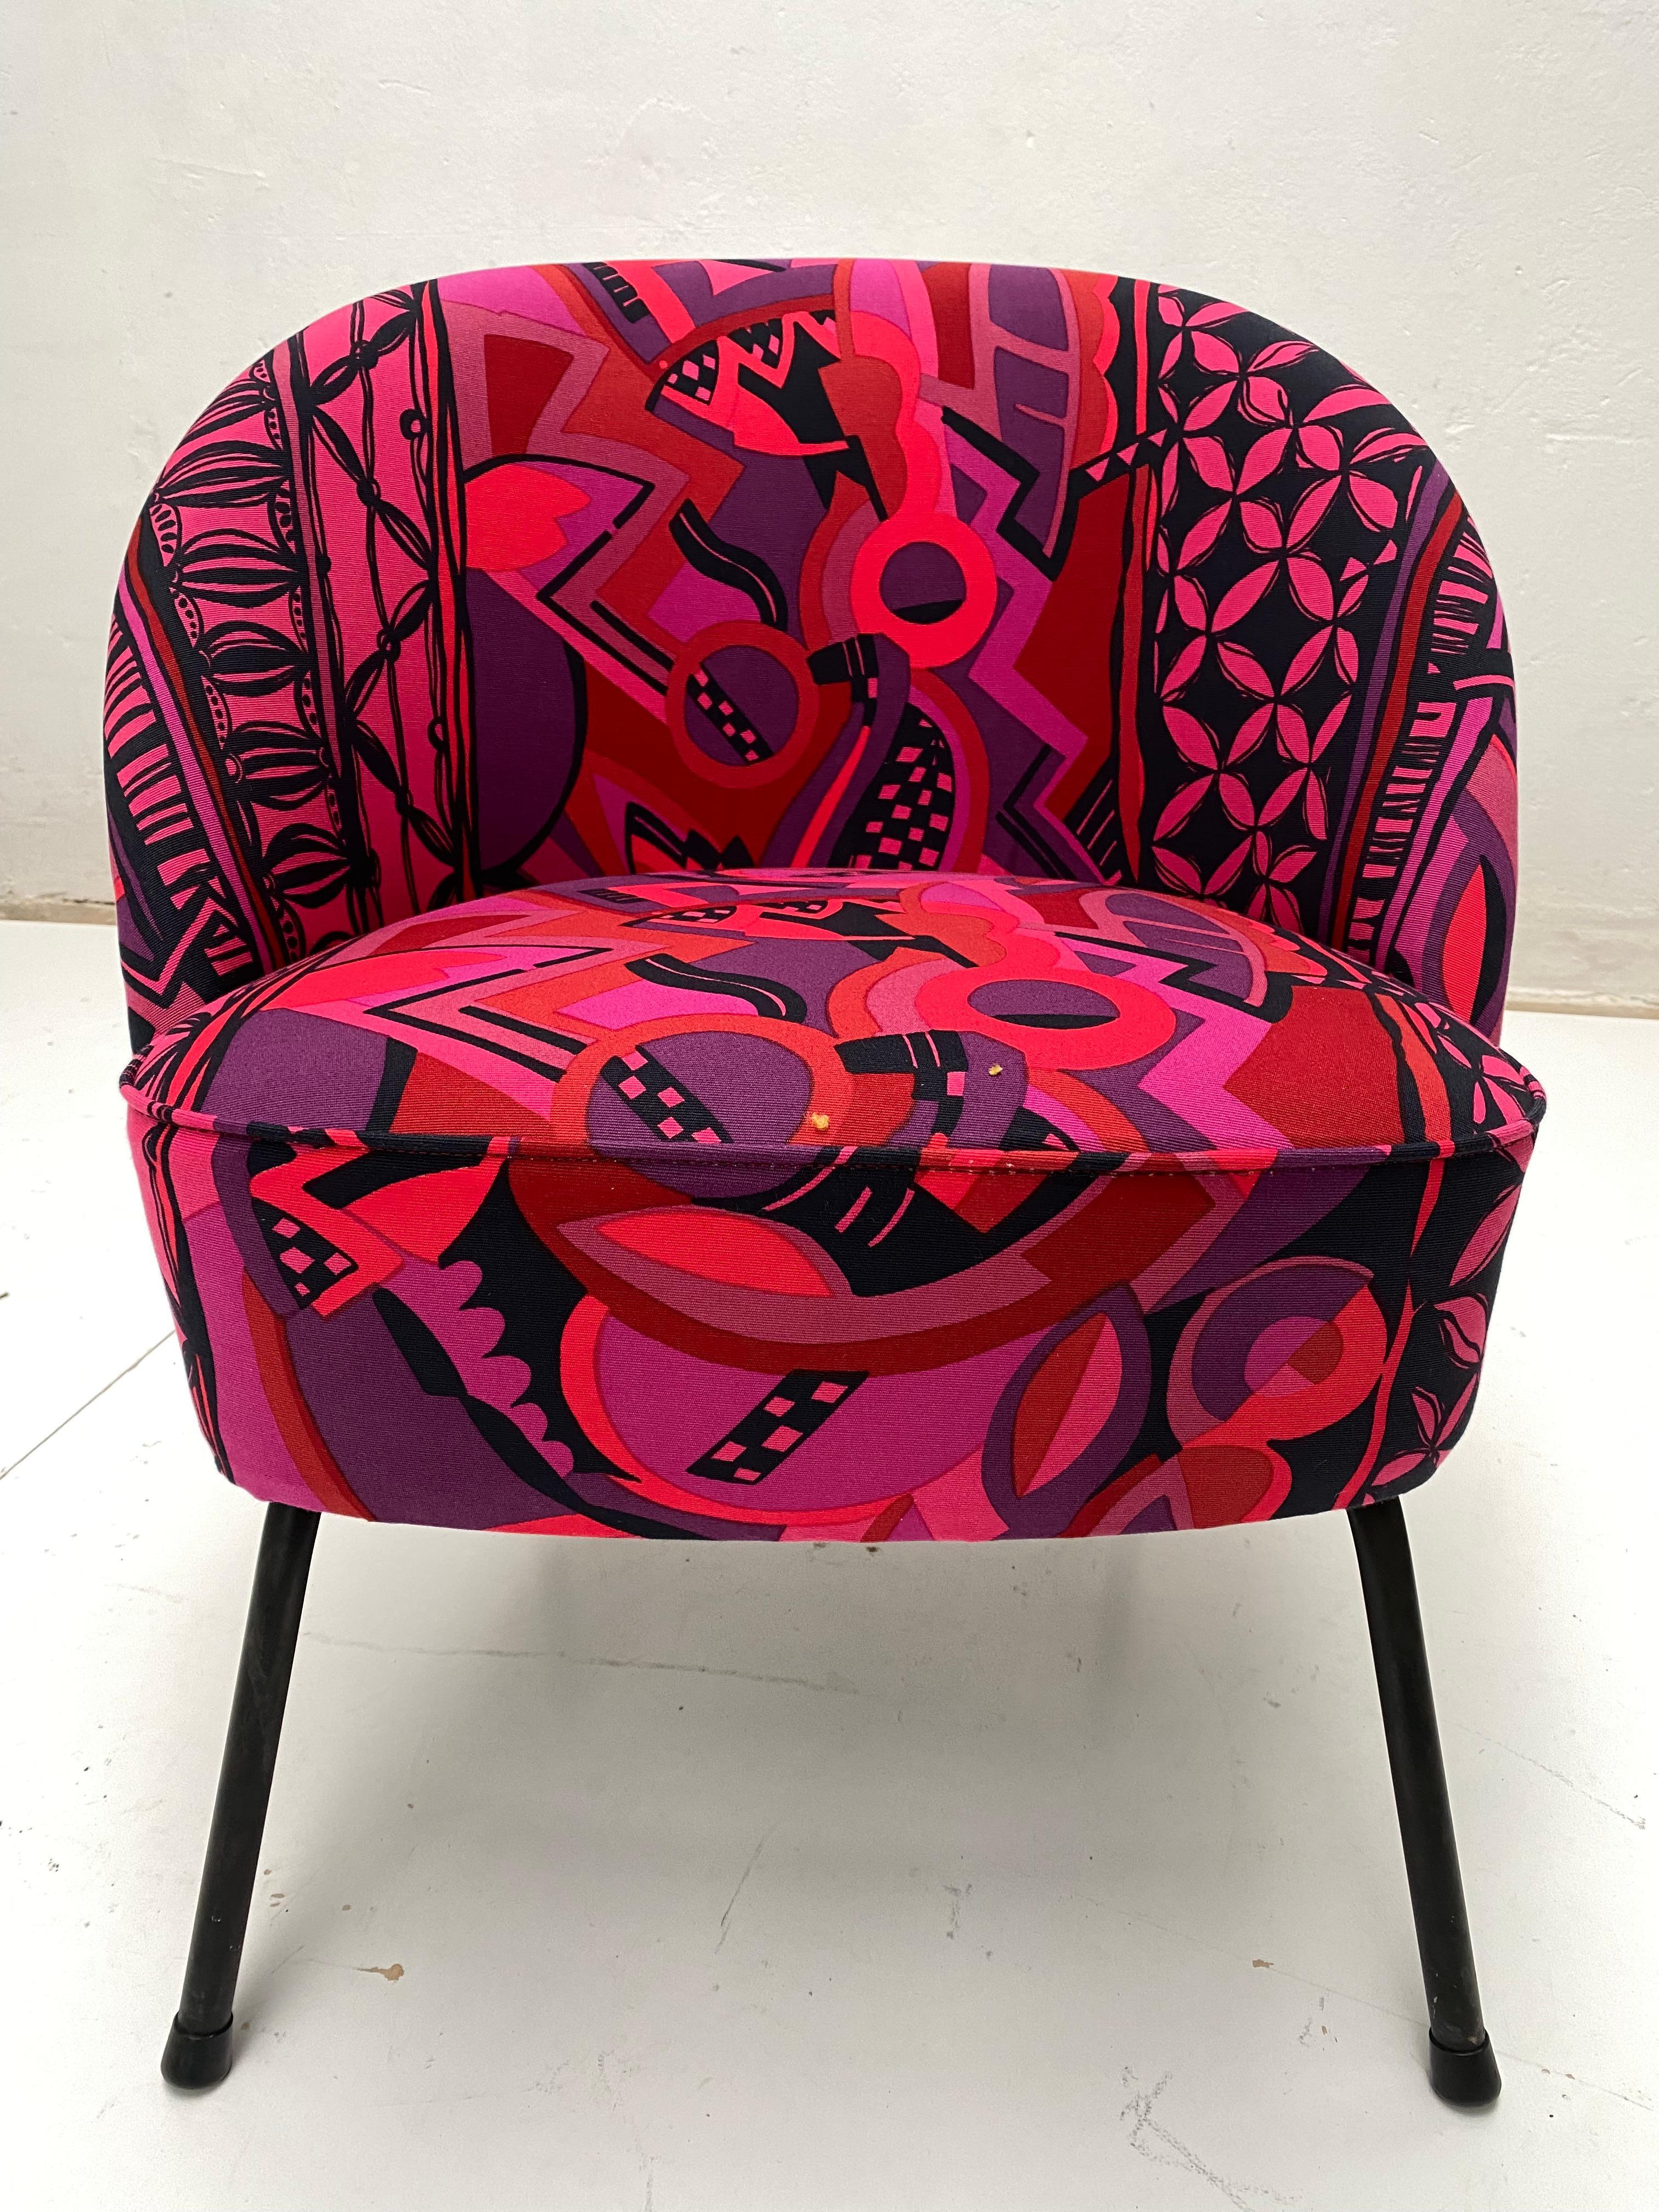 Bespoke Gianni Versace Fabric Custom Upholstered Pair of 1950's Cocktail Chairs For Sale 8